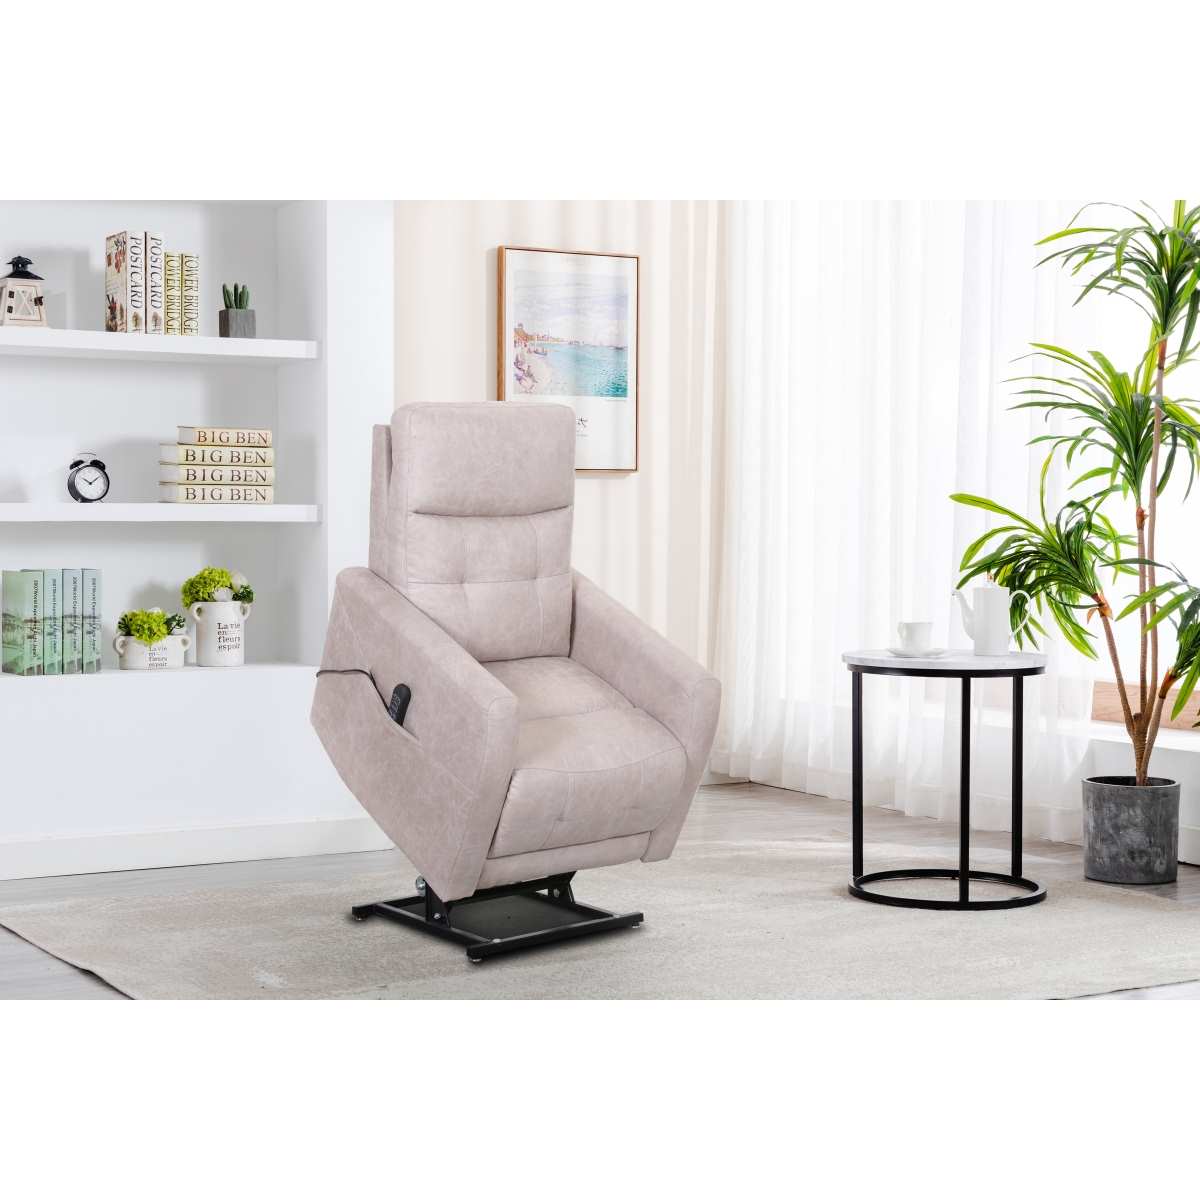 Aisha Medical Lift Chair with Power Headrests 99988